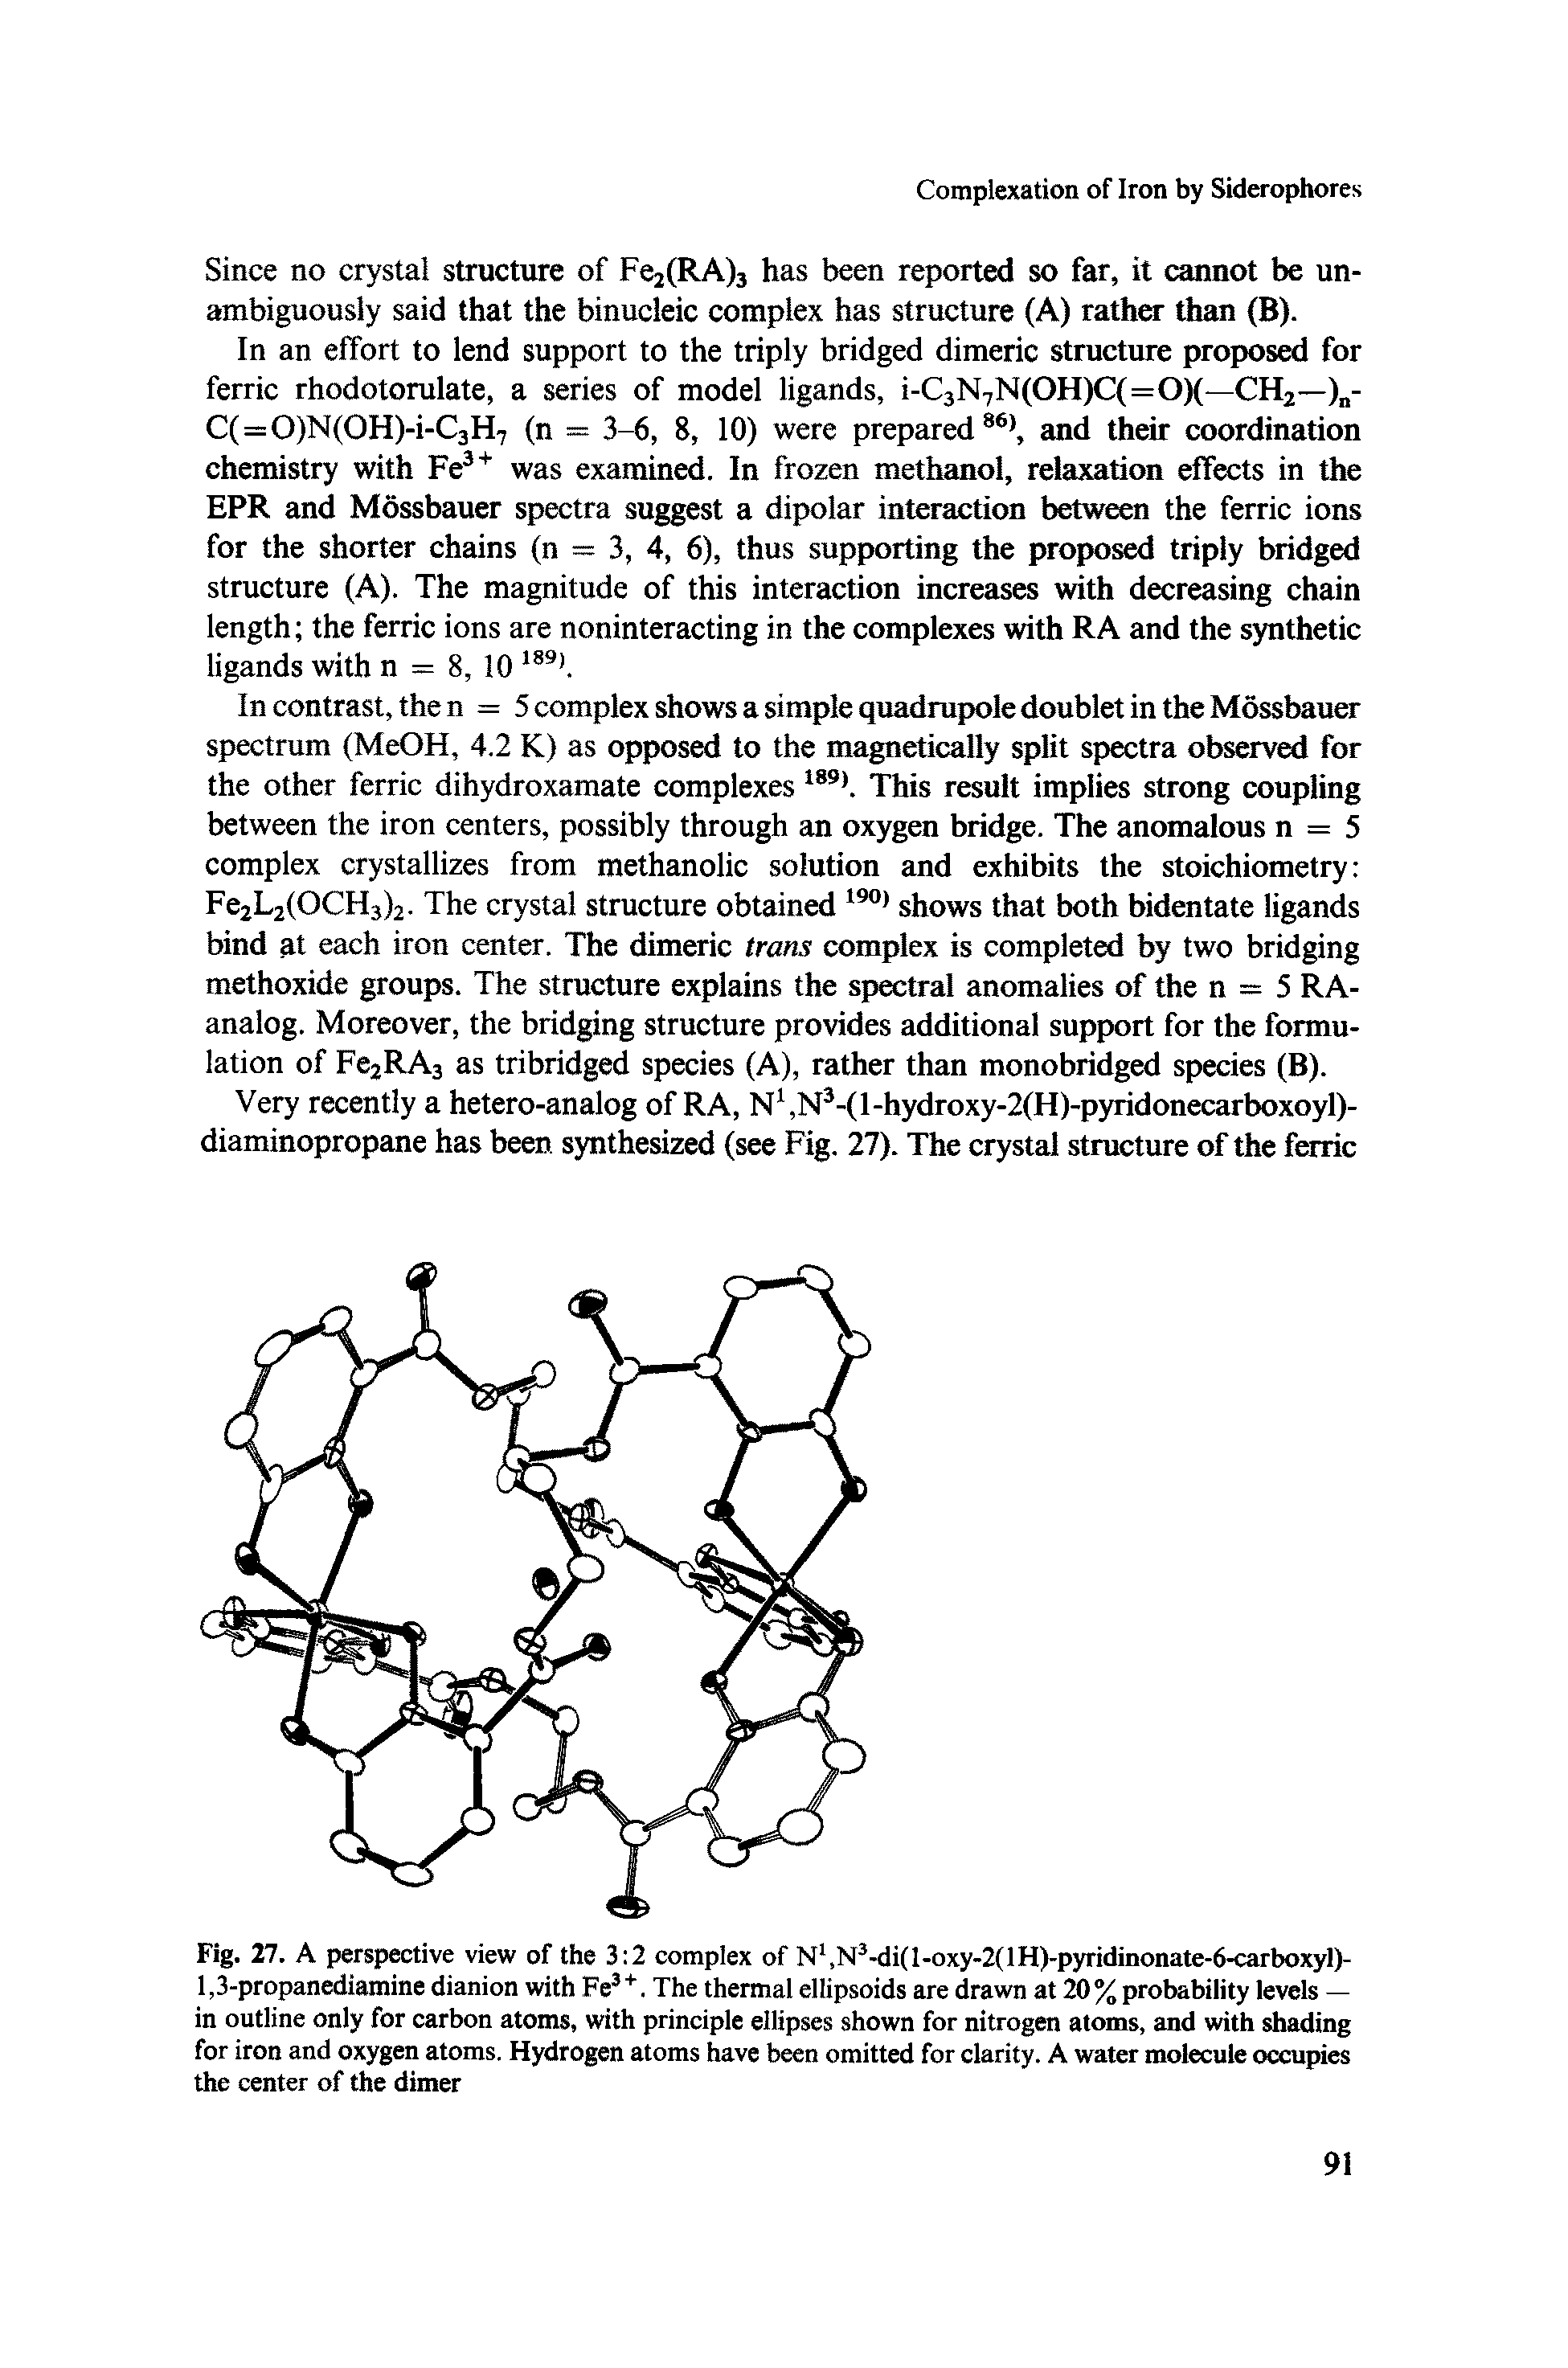 Fig. 27. A perspective view of the 3 2 complex of N1,N3-di(l-oxy-2(lH)-pyridinonate-6-carboxyl)-1,3-propanediamine dianion with Fe3+. The thermal ellipsoids are drawn at 20% probability levels — in outline only for carbon atoms, with principle ellipses shown for nitrogen atoms, and with shading for iron and oxygen atoms. Hydrogen atoms have been omitted for clarity. A water molecule occupies the center of the dimer...